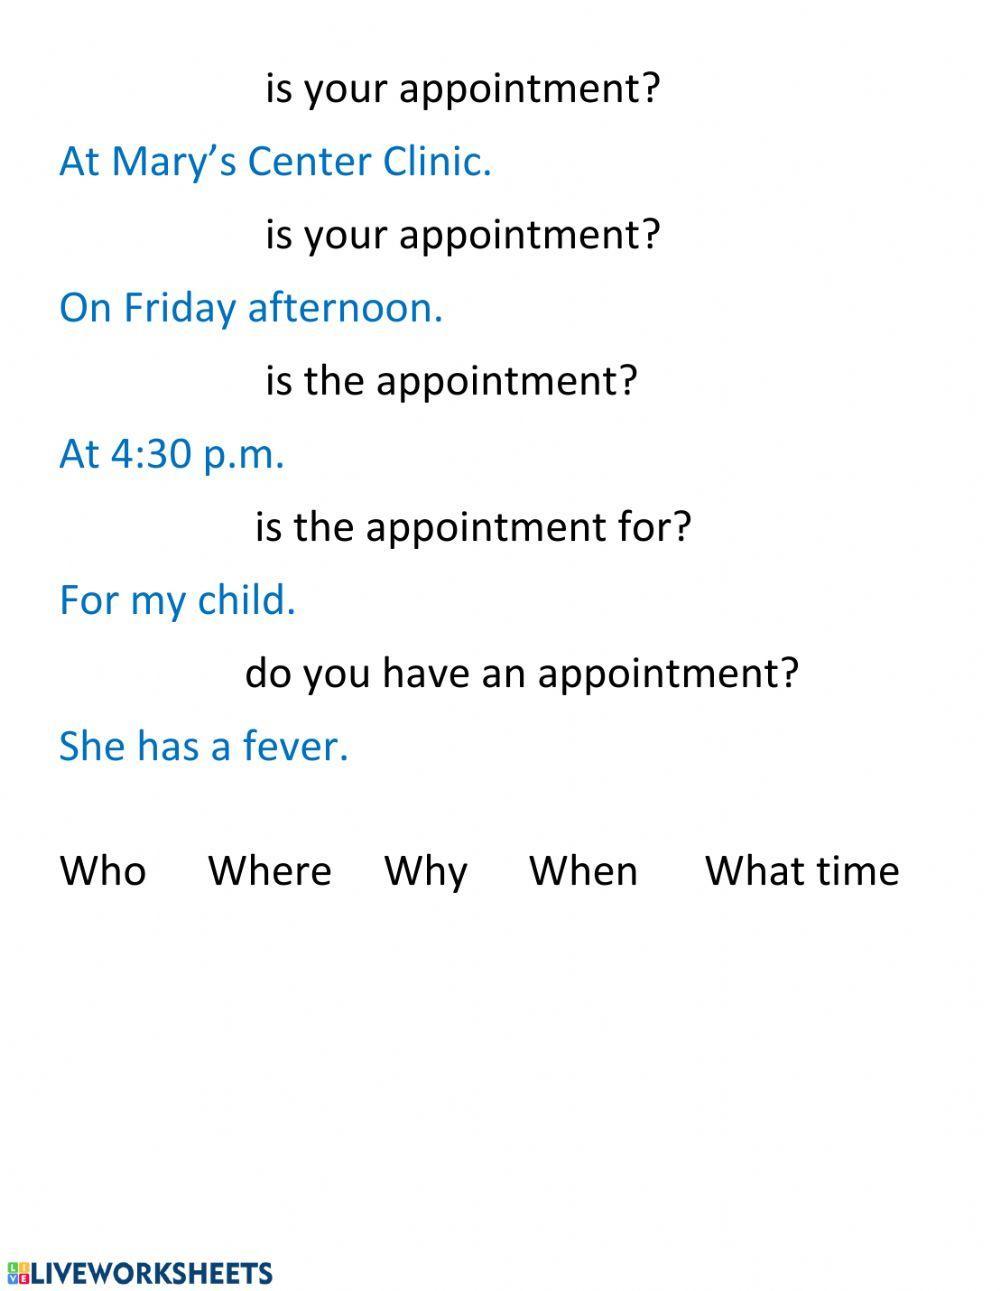 Make an appointment: fill in the question words